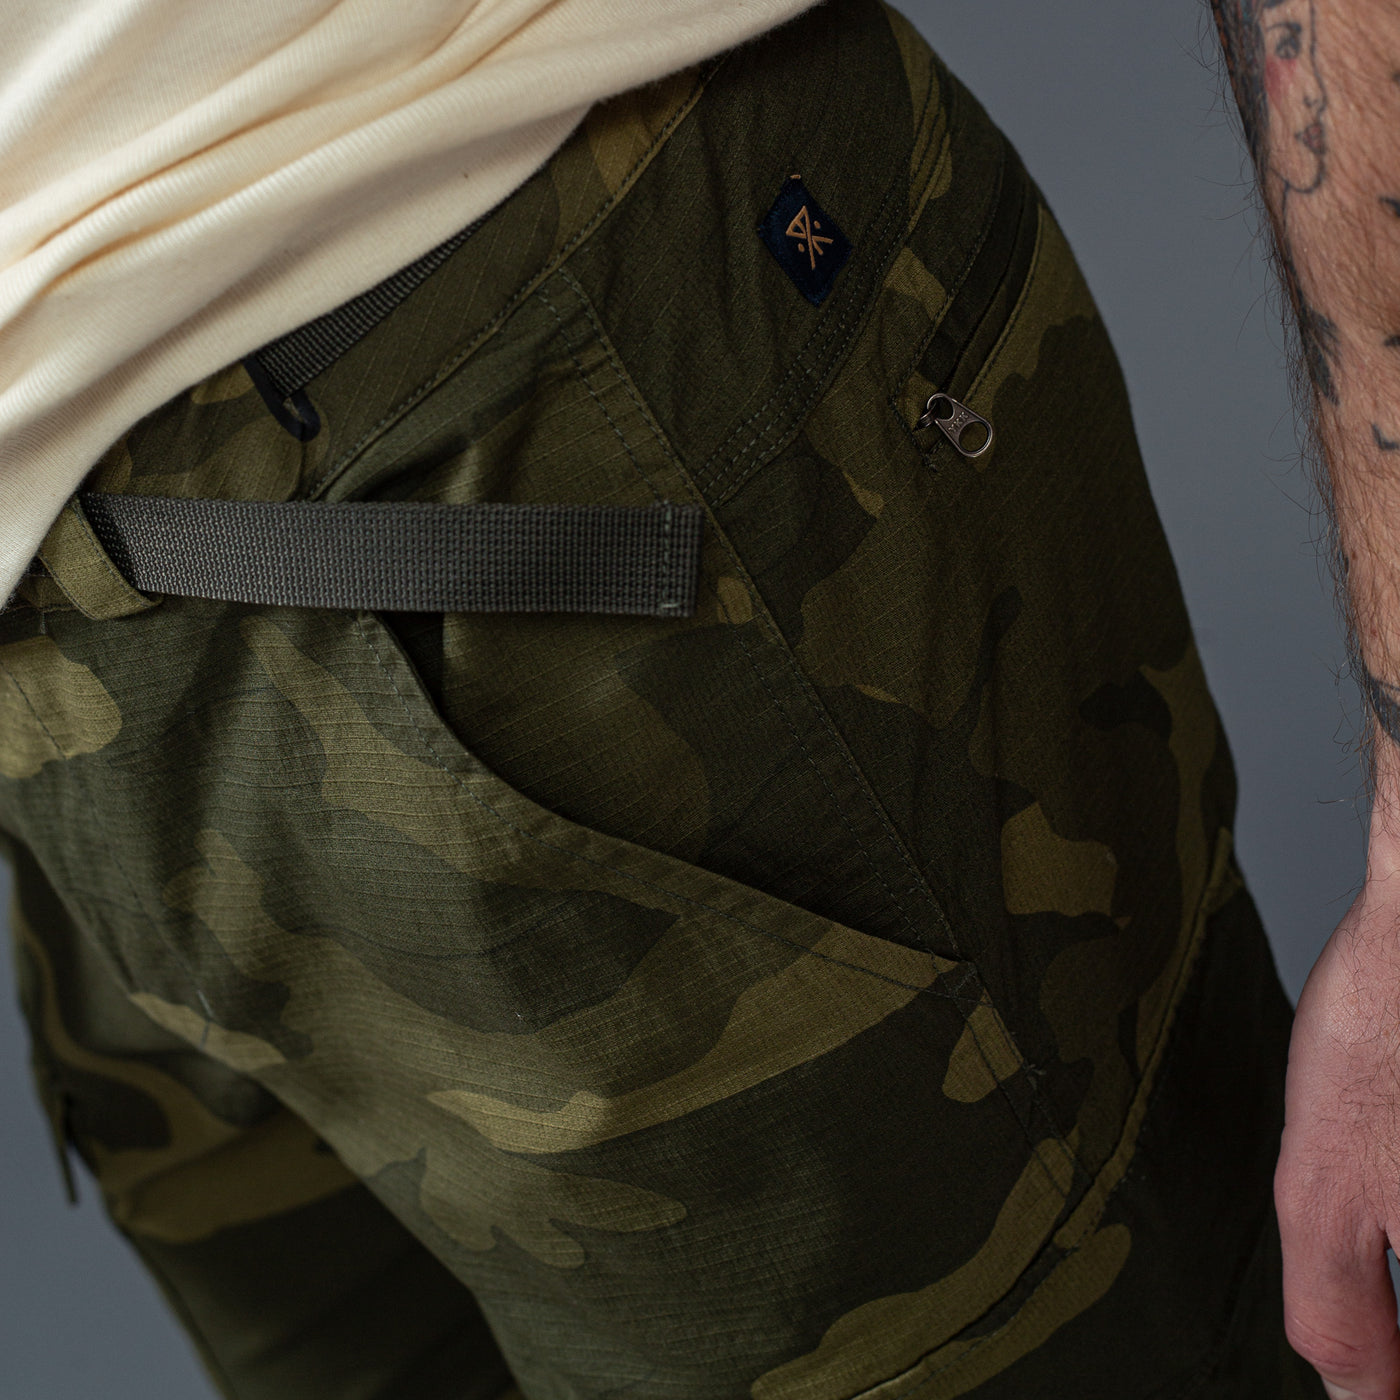 ROARK - Trousers - Camouflage Pant - CAMPOVER